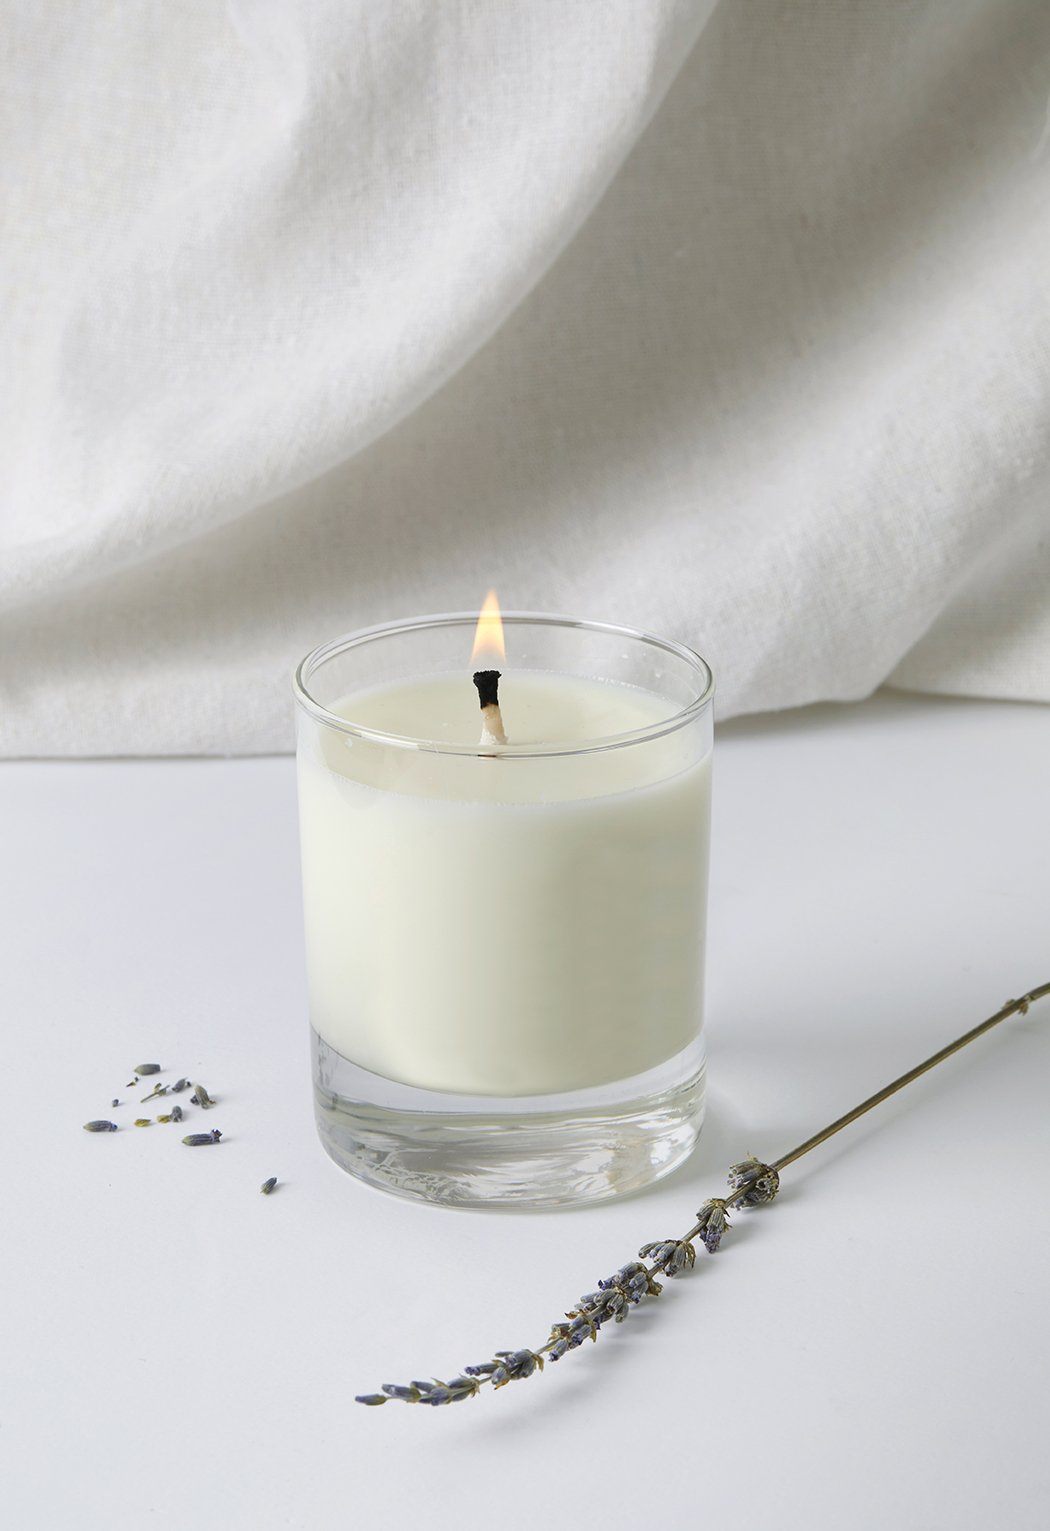 Lavender (essential oil) Soy Wax Votive Candle Toiletries Lavender Hill Clothing